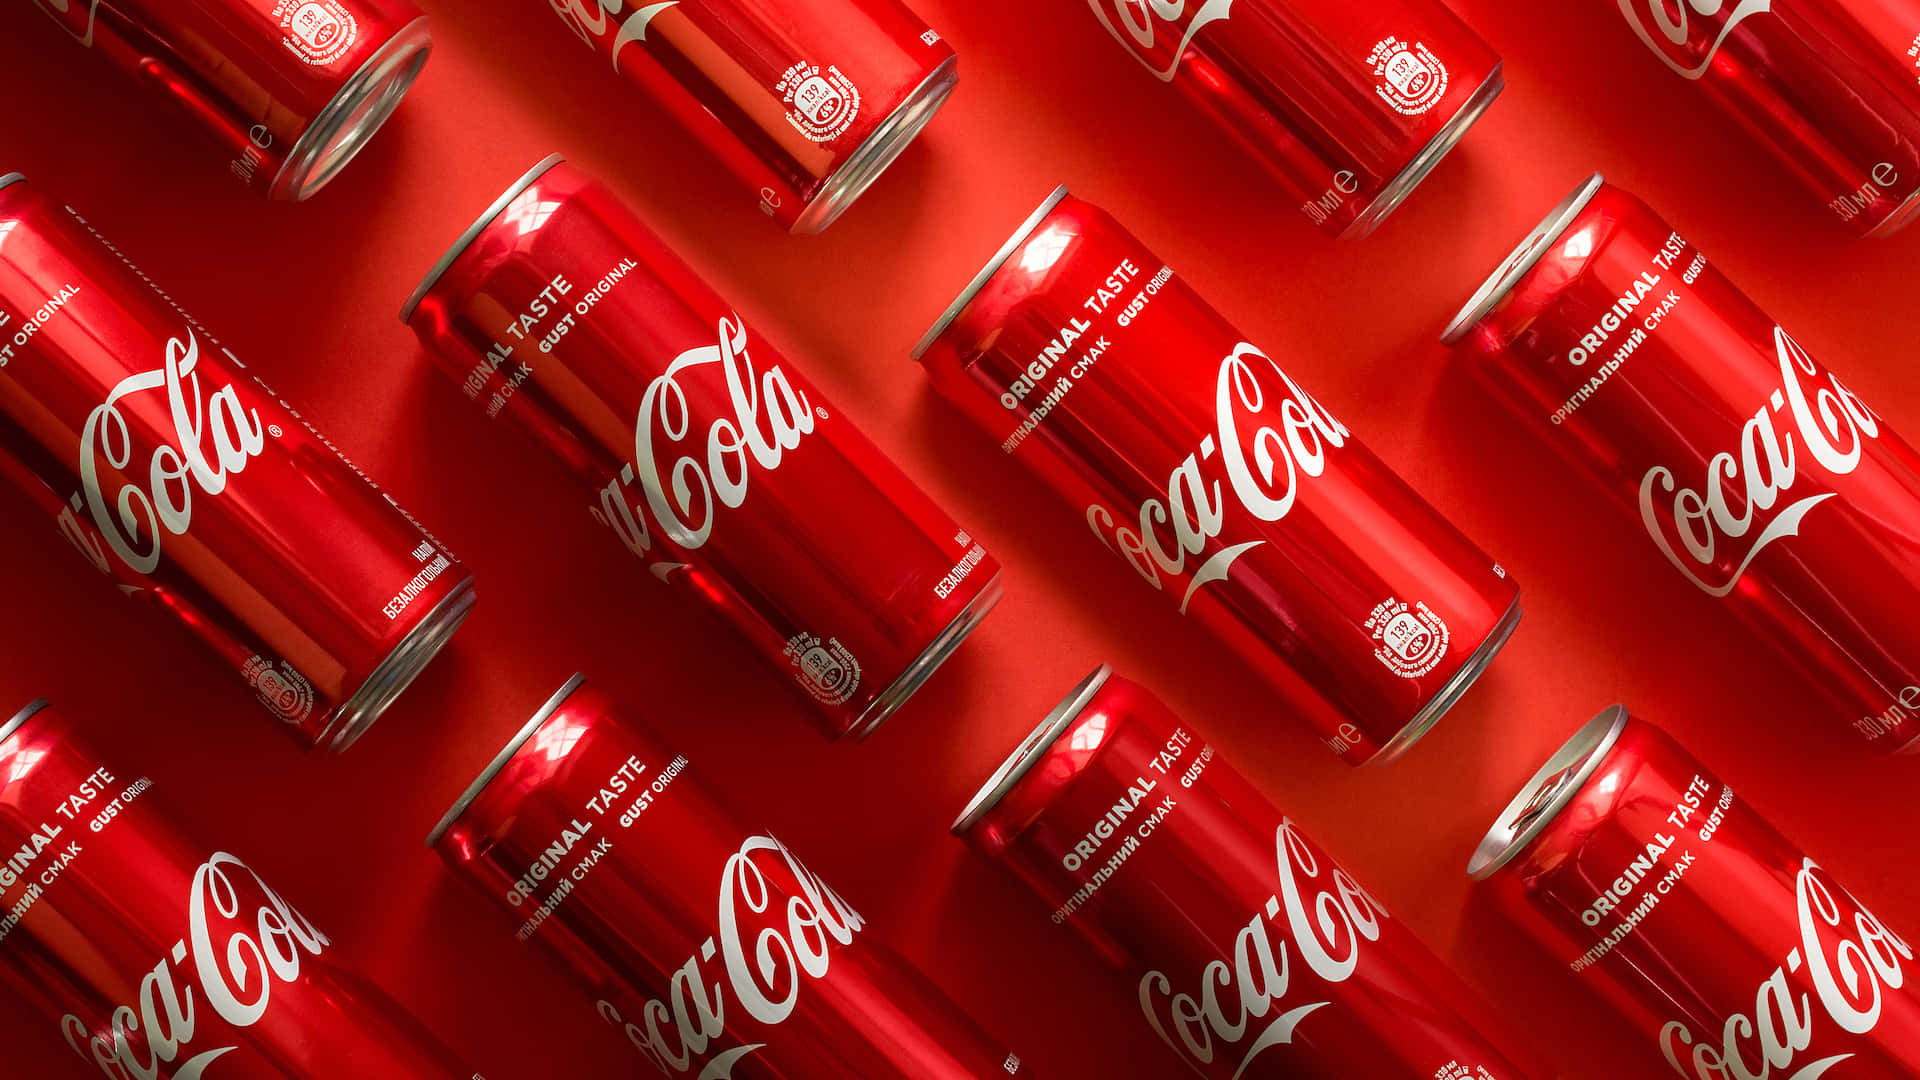 Refresh your day with Coca-Cola